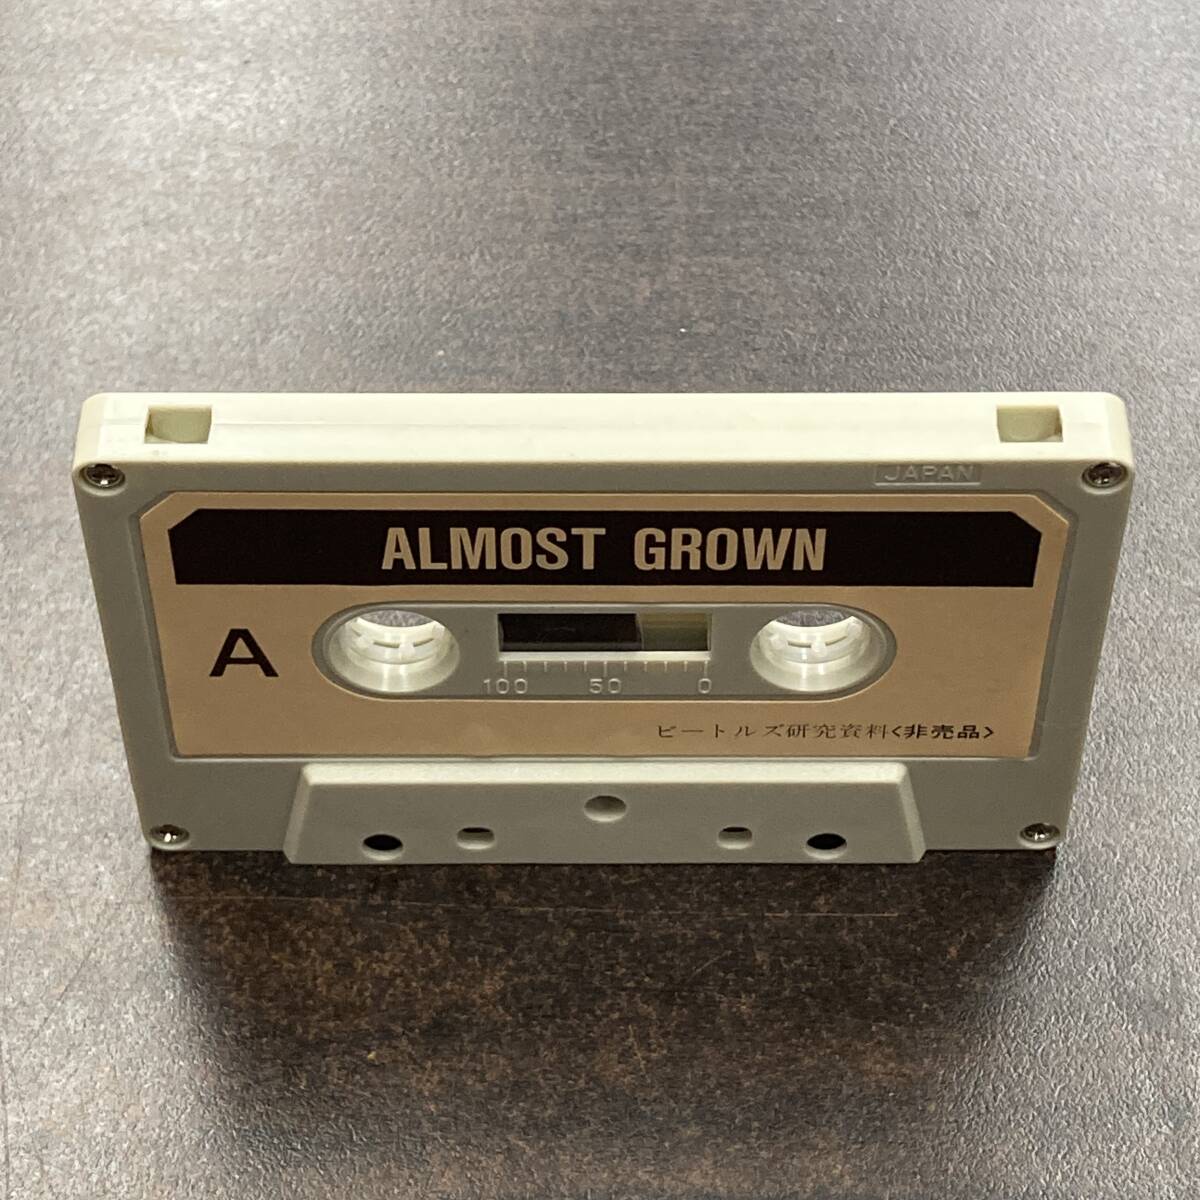 1205M ザ・ビートルズ 研究資料 ALMOST GROWIN & I HAD A DREAM カセットテープ / THE BEATLES Research materials Cassette Tapeの画像2